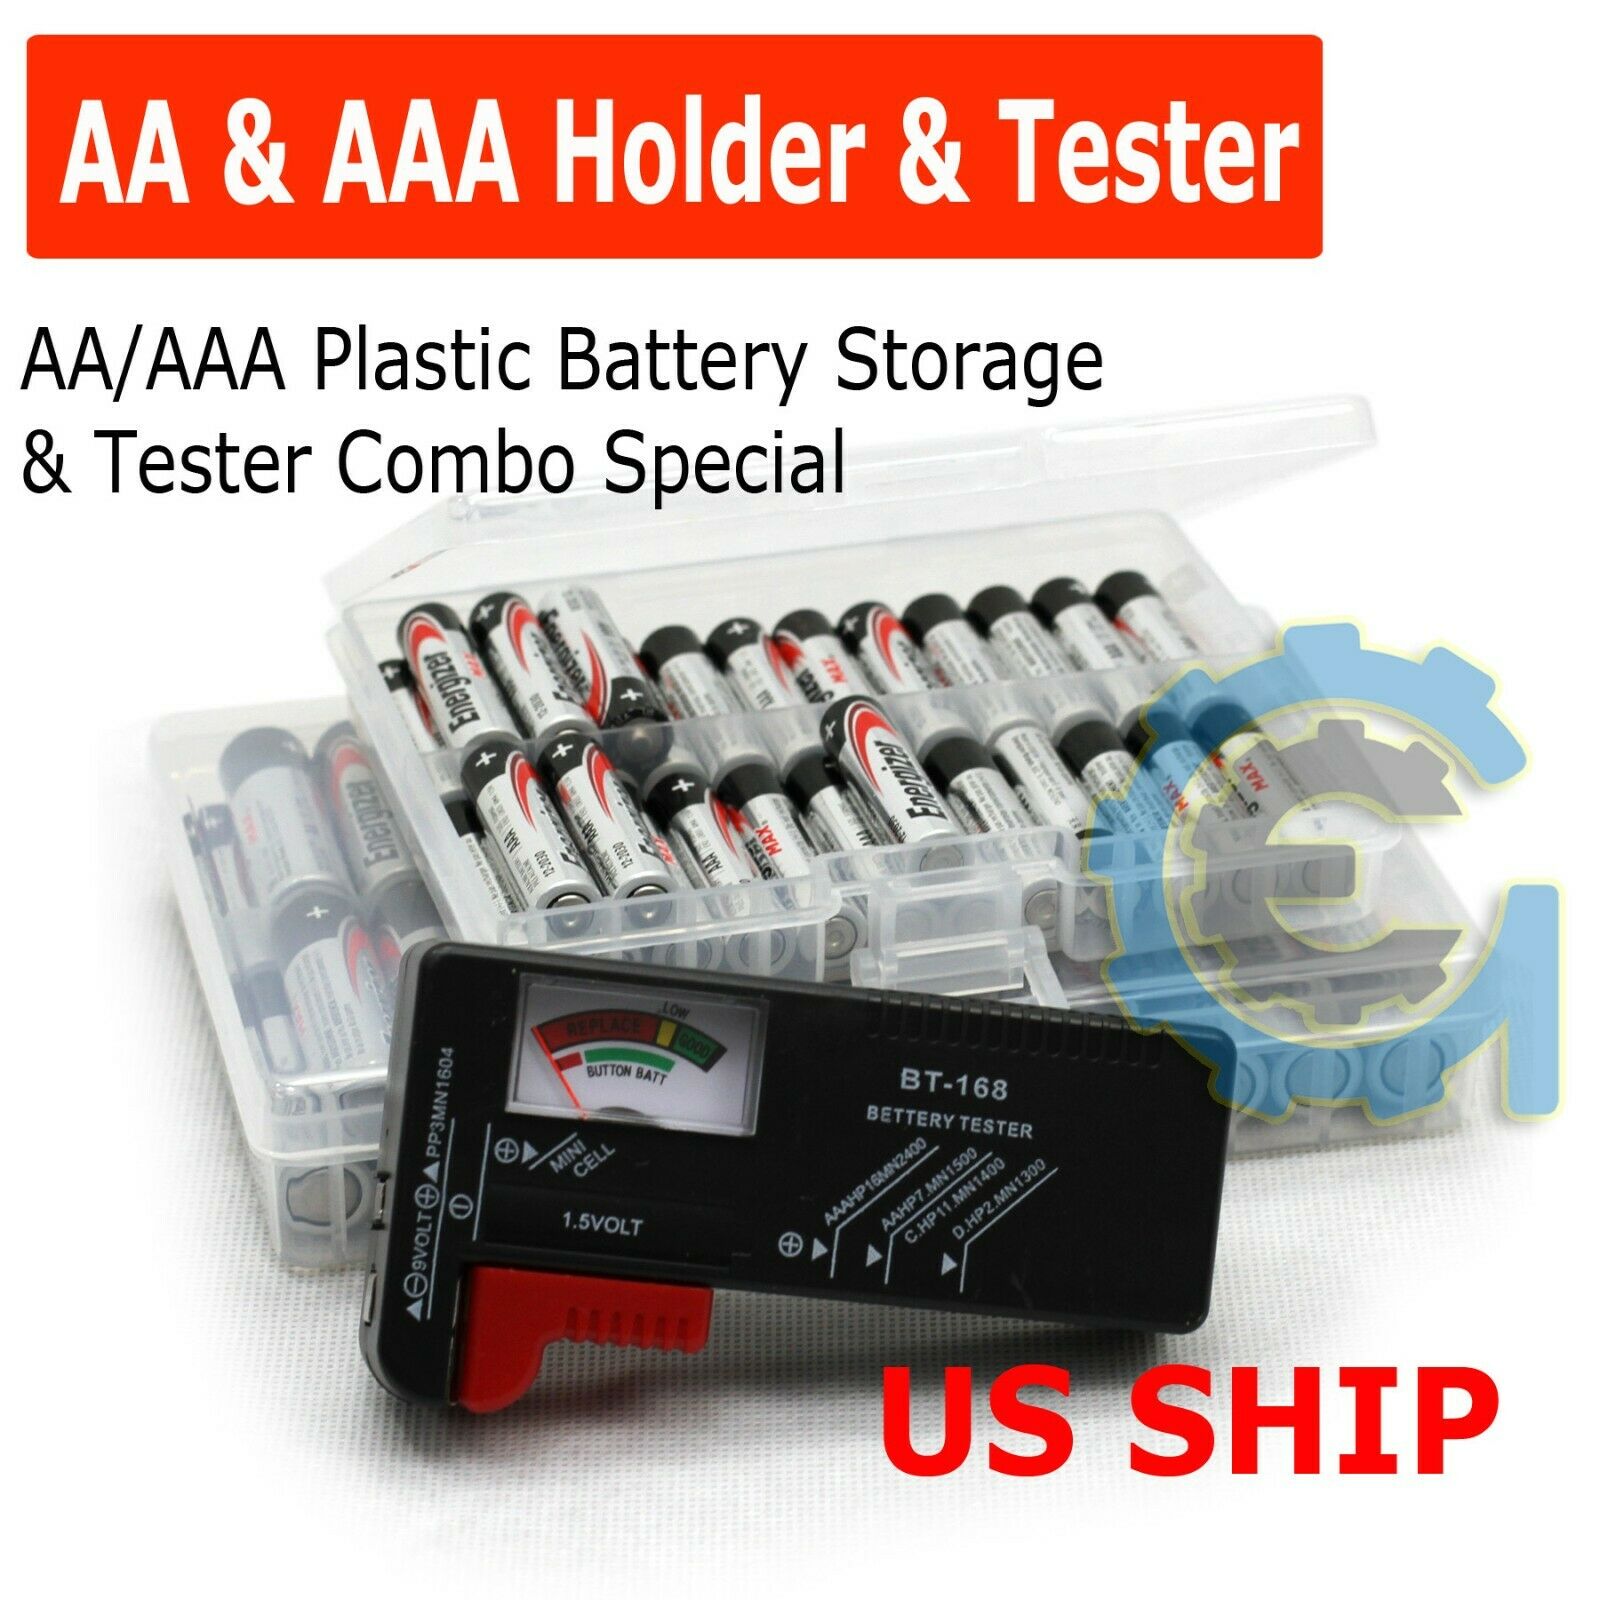 New Battery Tester Universal Volt Checker Aaa, Aa, C, D, 9v & Button Cell Us